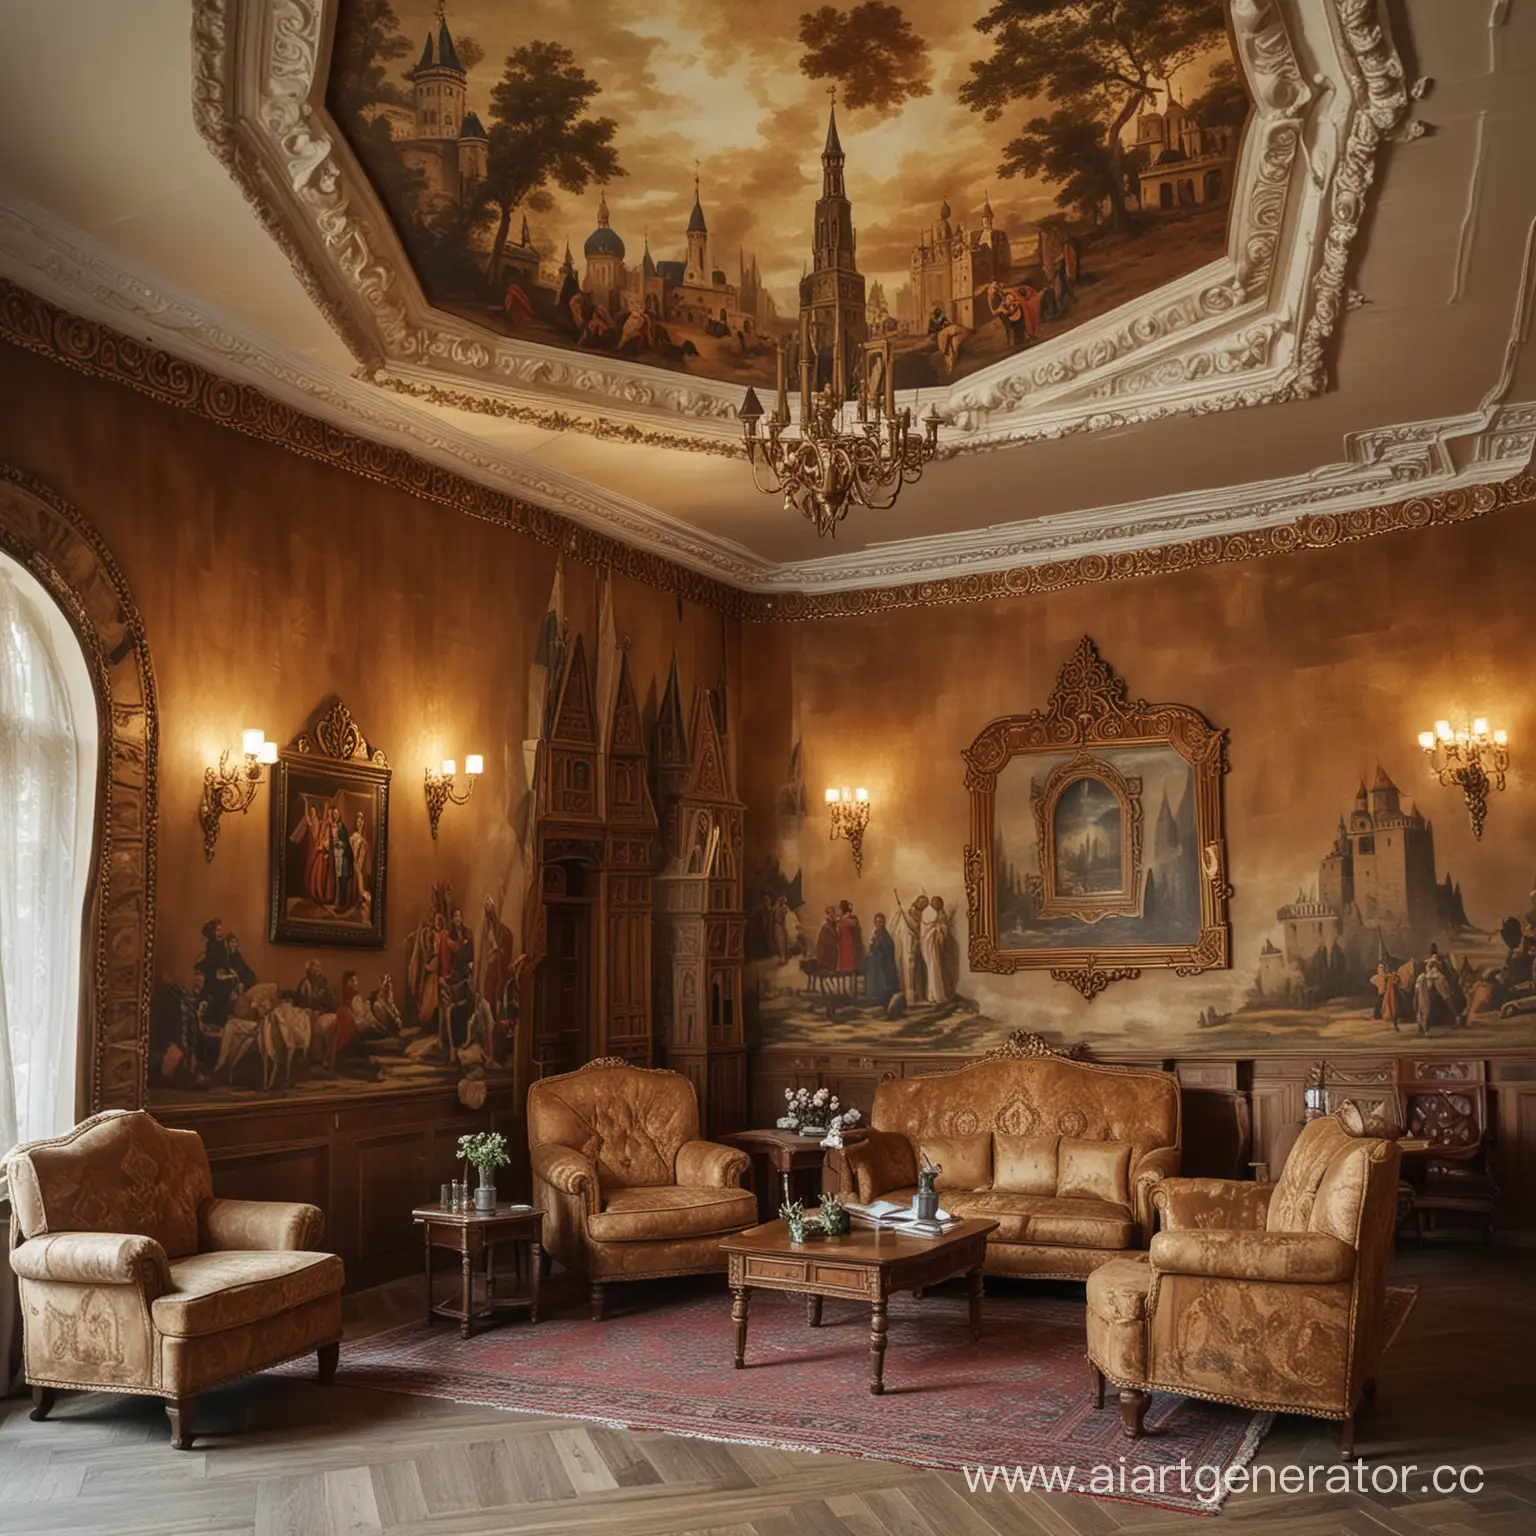 Stylish-Olonets-Fortress-Themed-Hotel-Reception-with-Antique-Russian-Decor